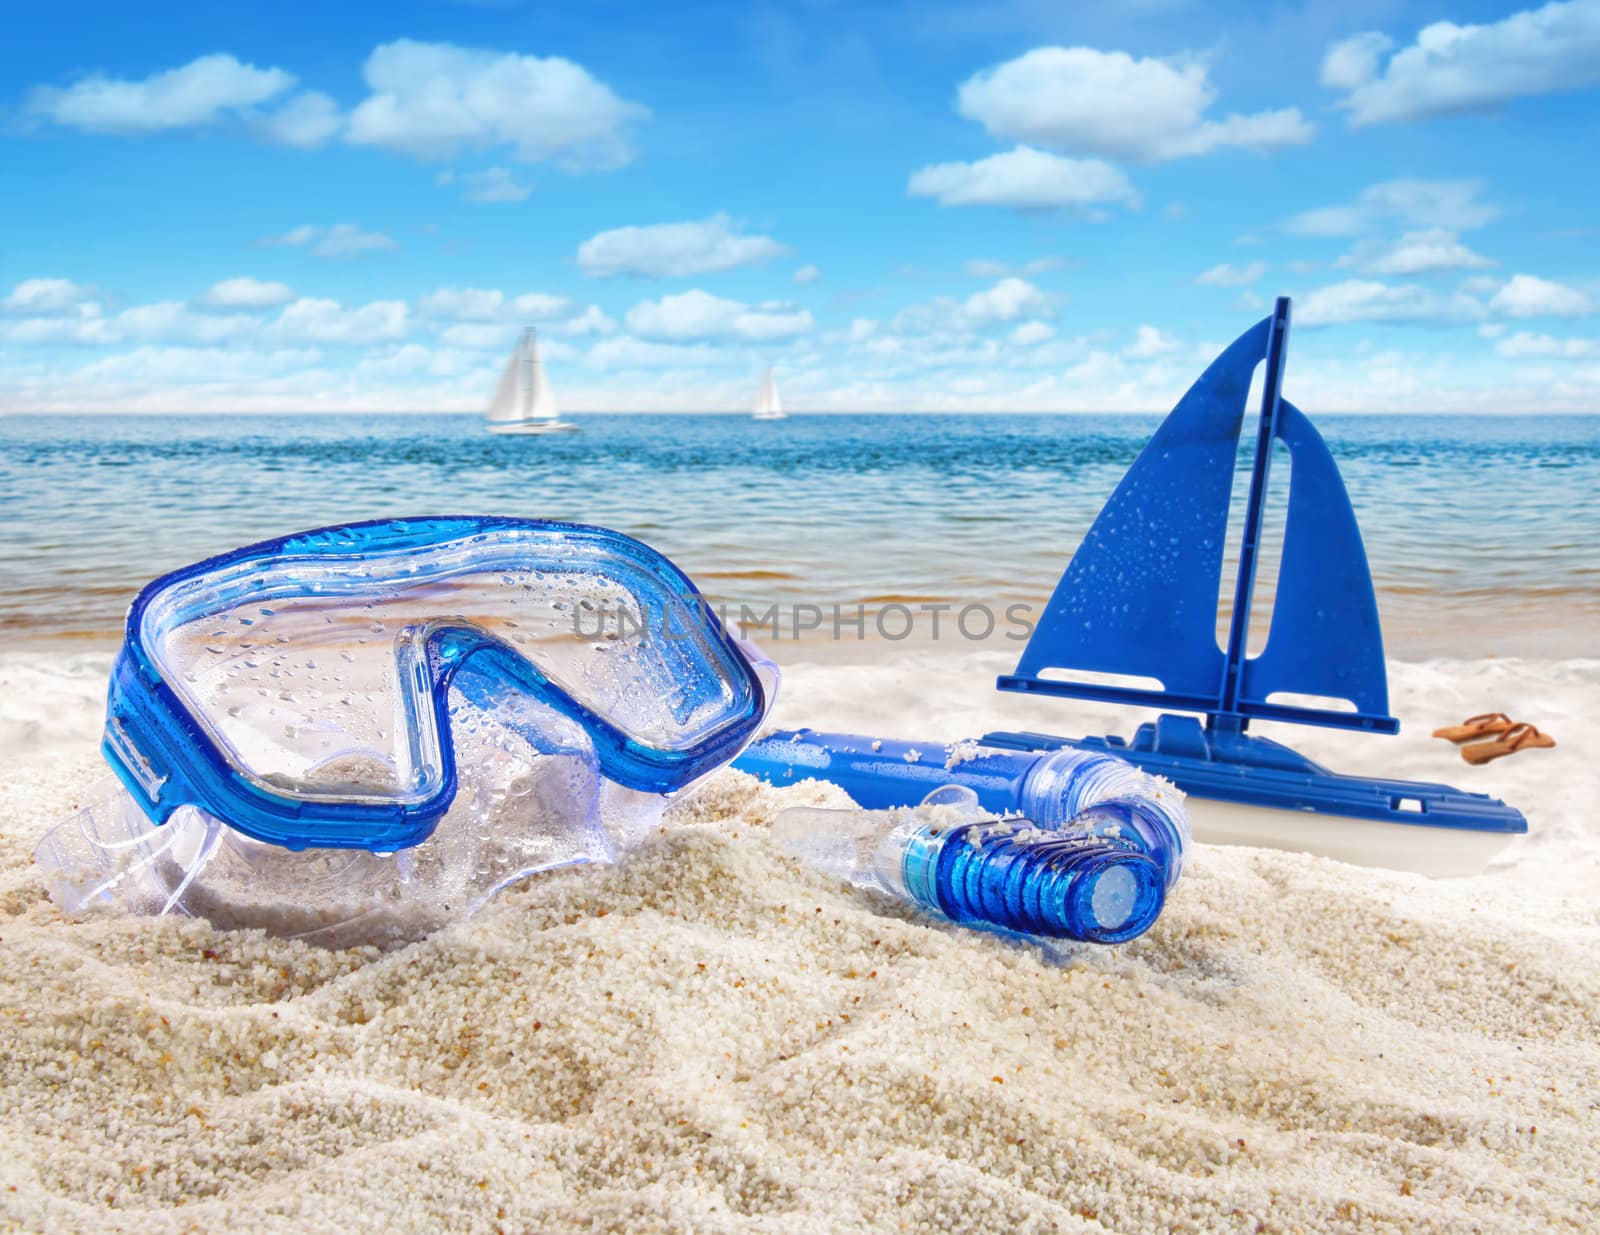 Goggles and toy sailboat in sand at the beach scene 